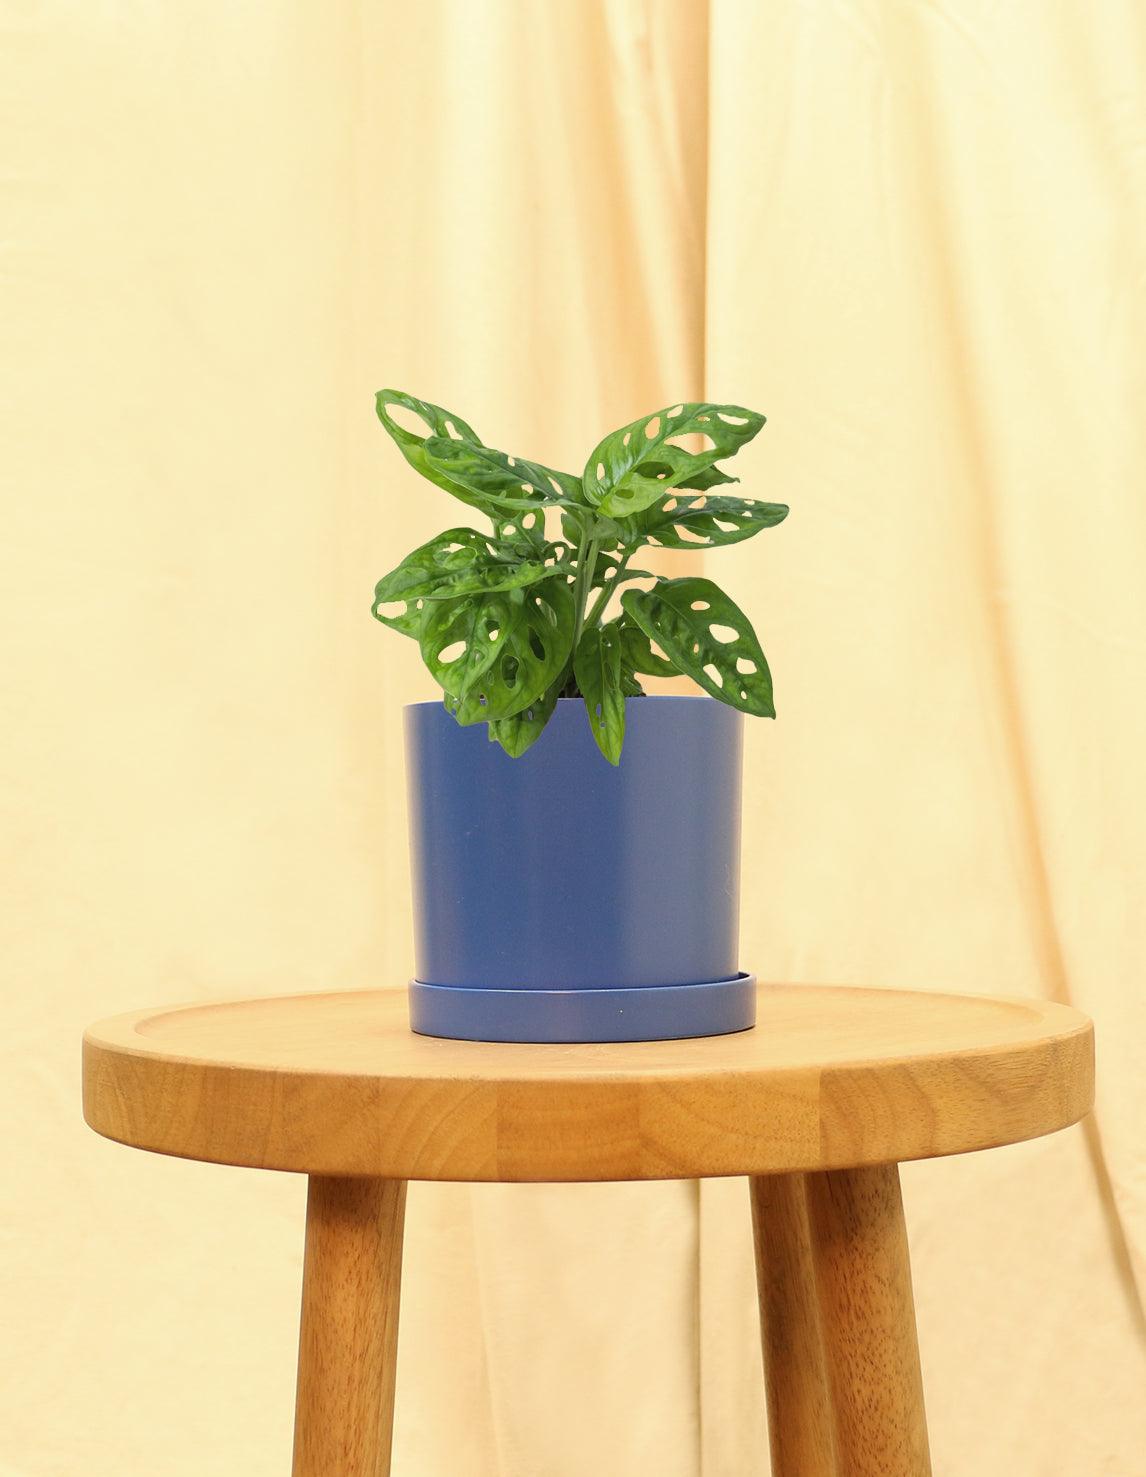 Small Swiss Cheese Plant in blue pot.